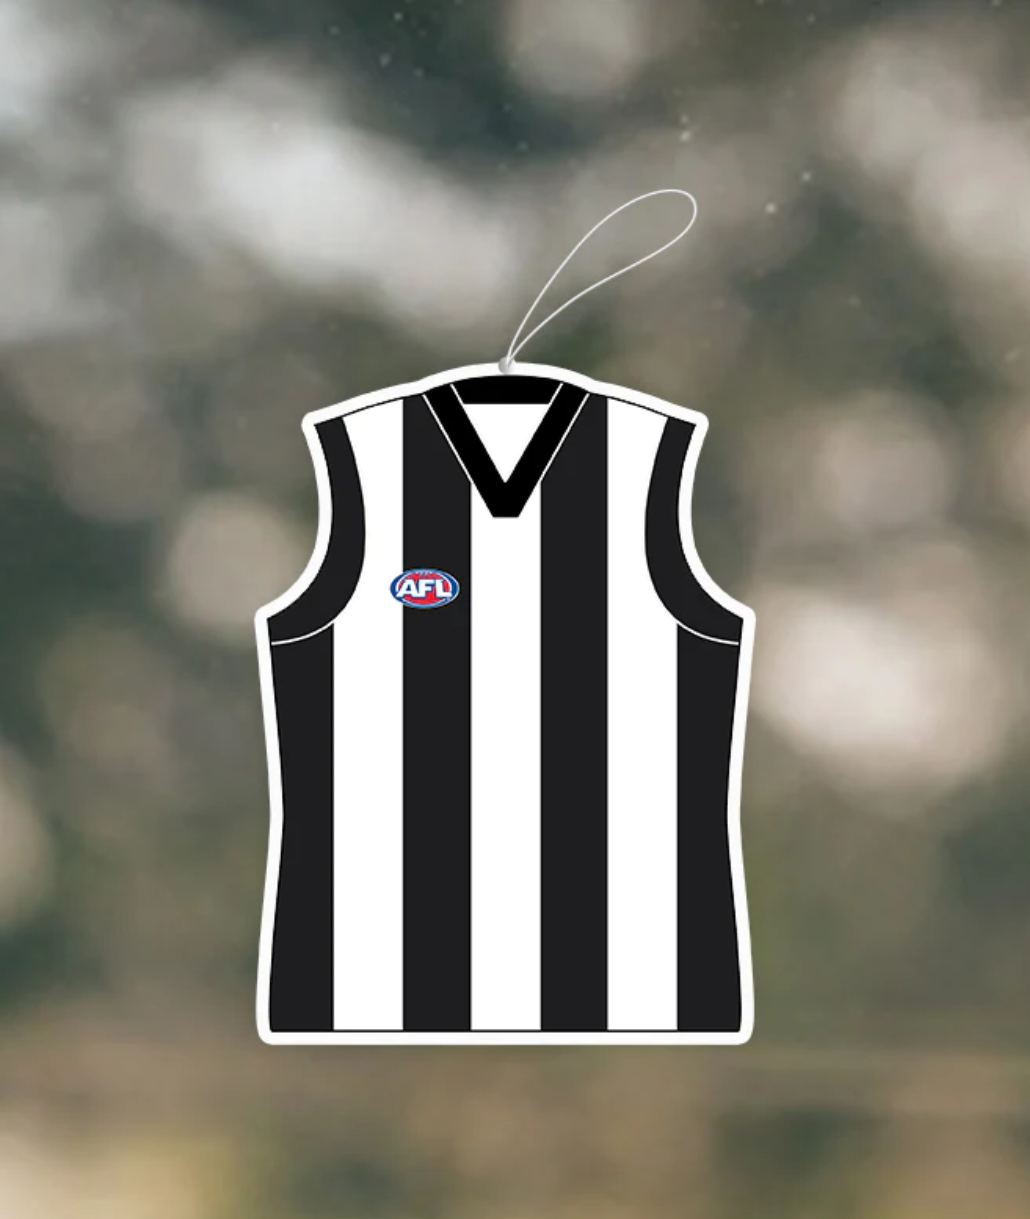 Collingwood Magpies Bundle (8x Logo and 8x Guernsey Air Fresheners)